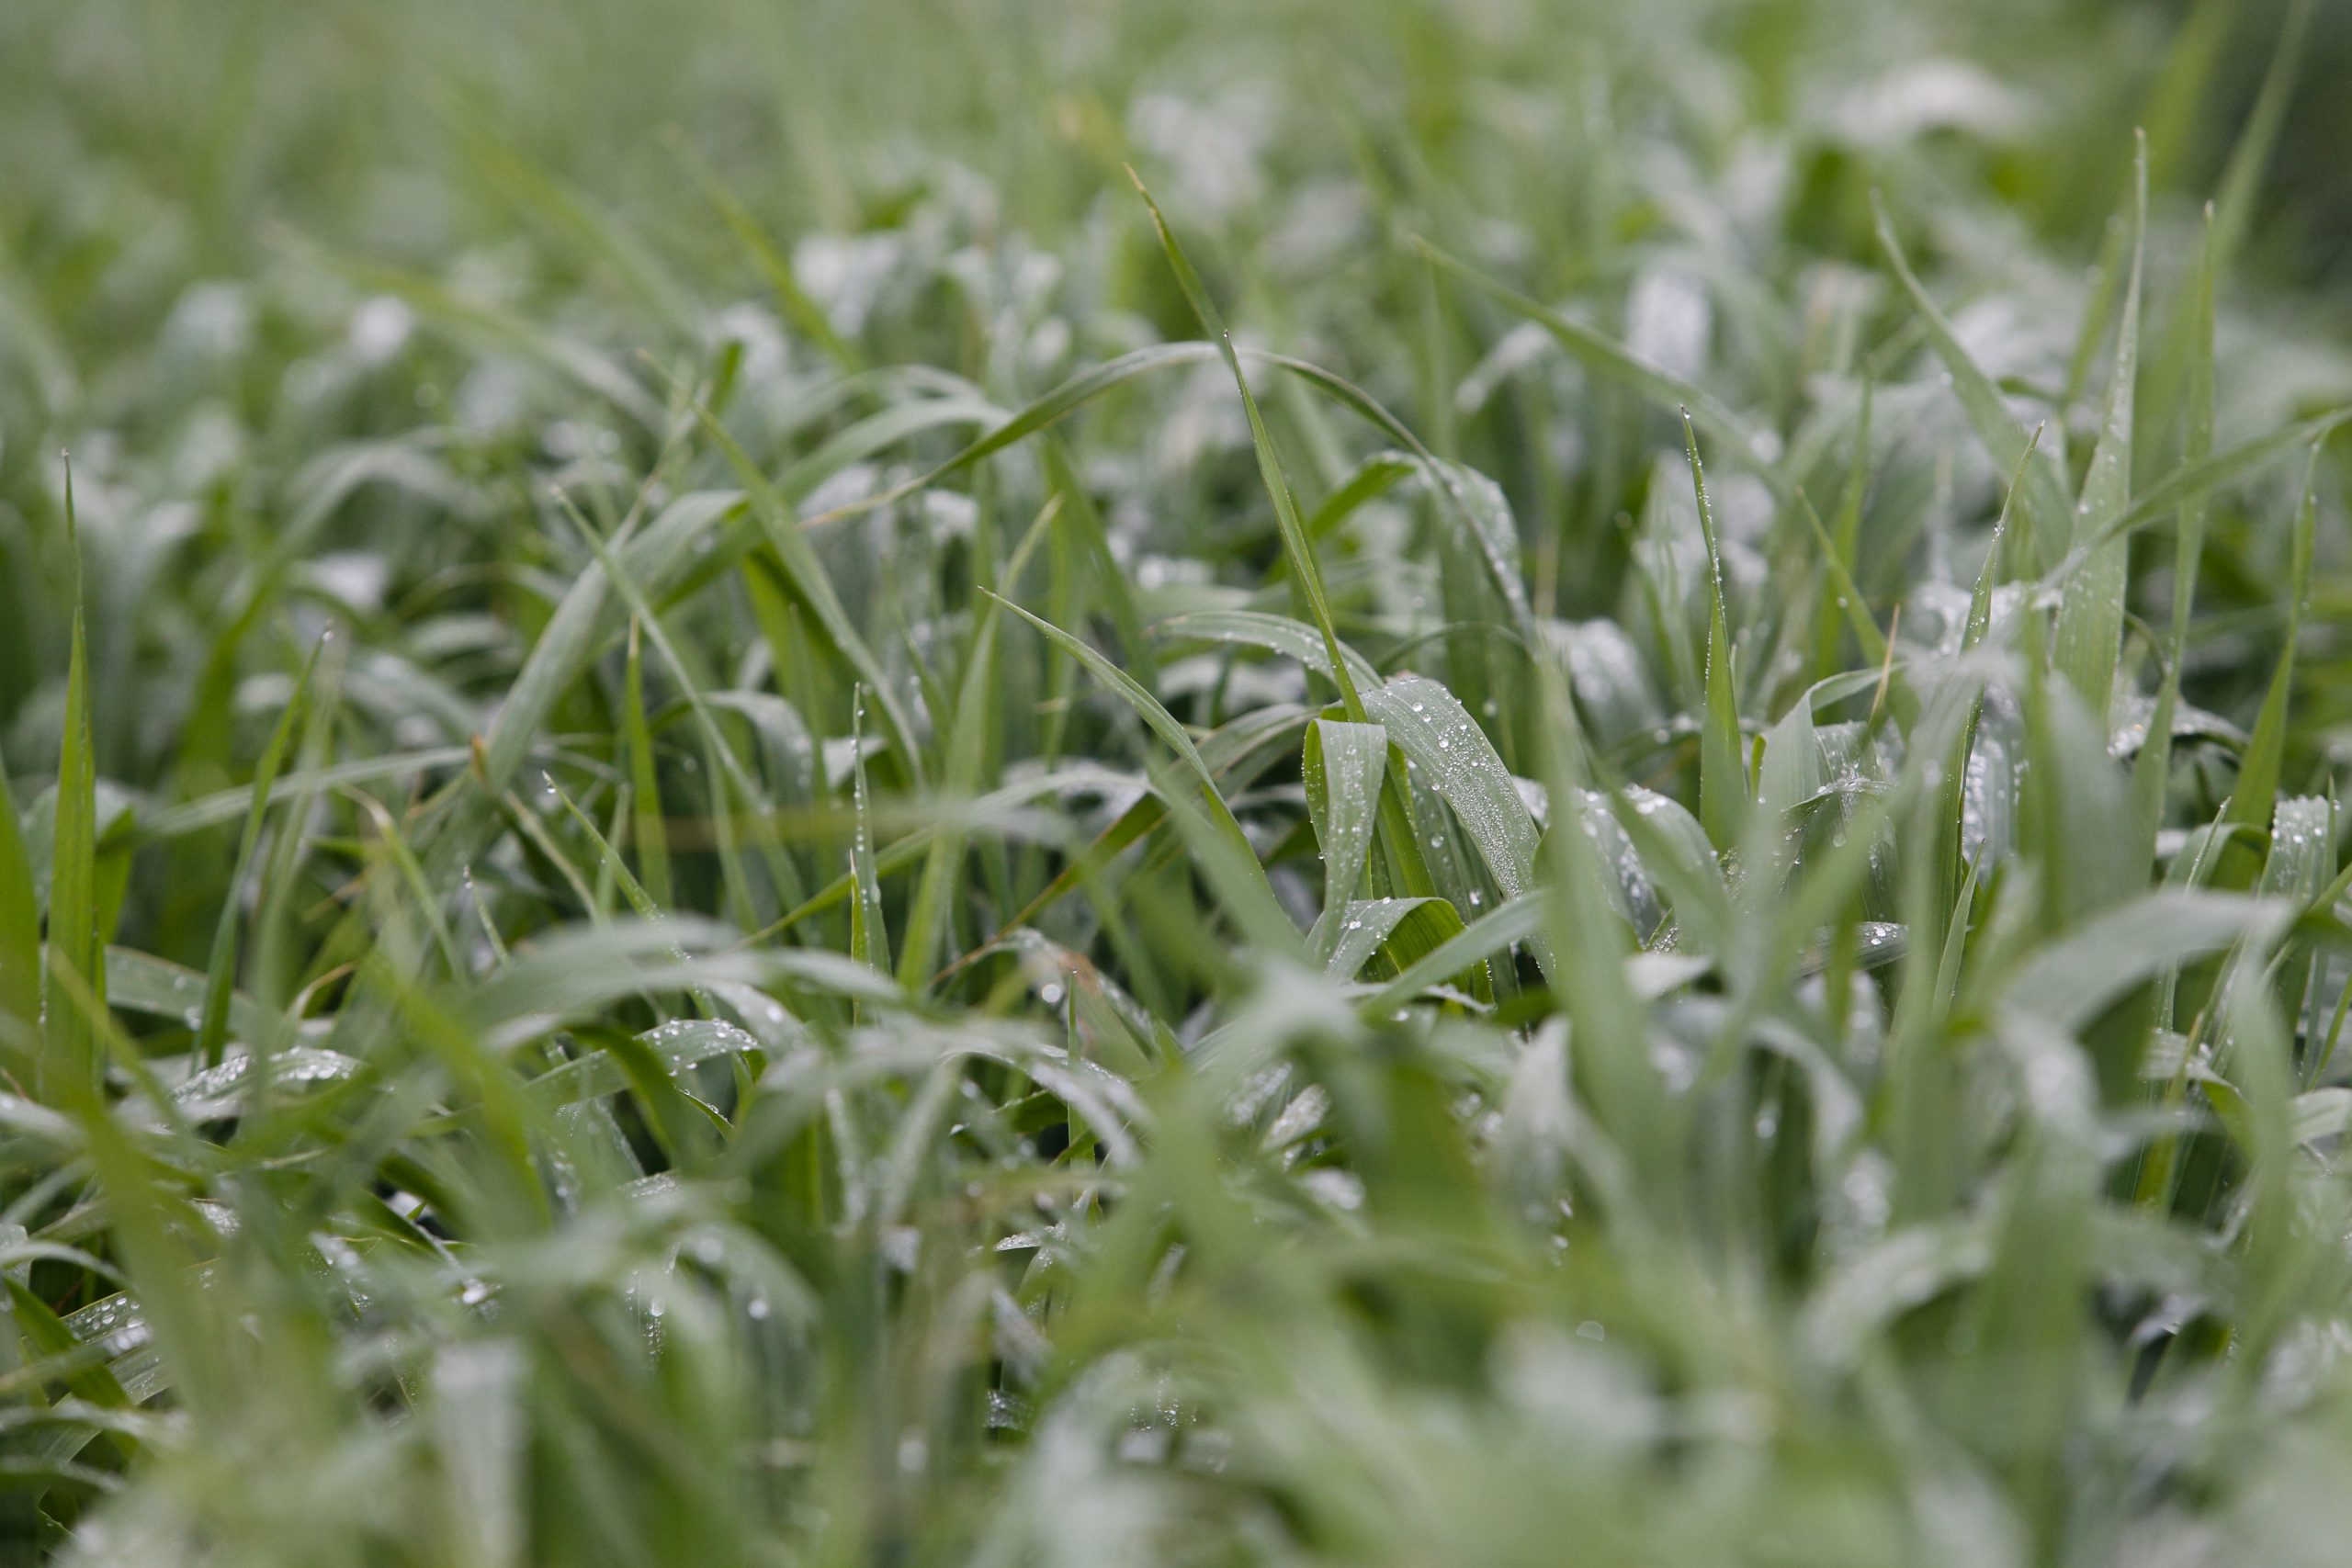 Grass covered in drops of rain